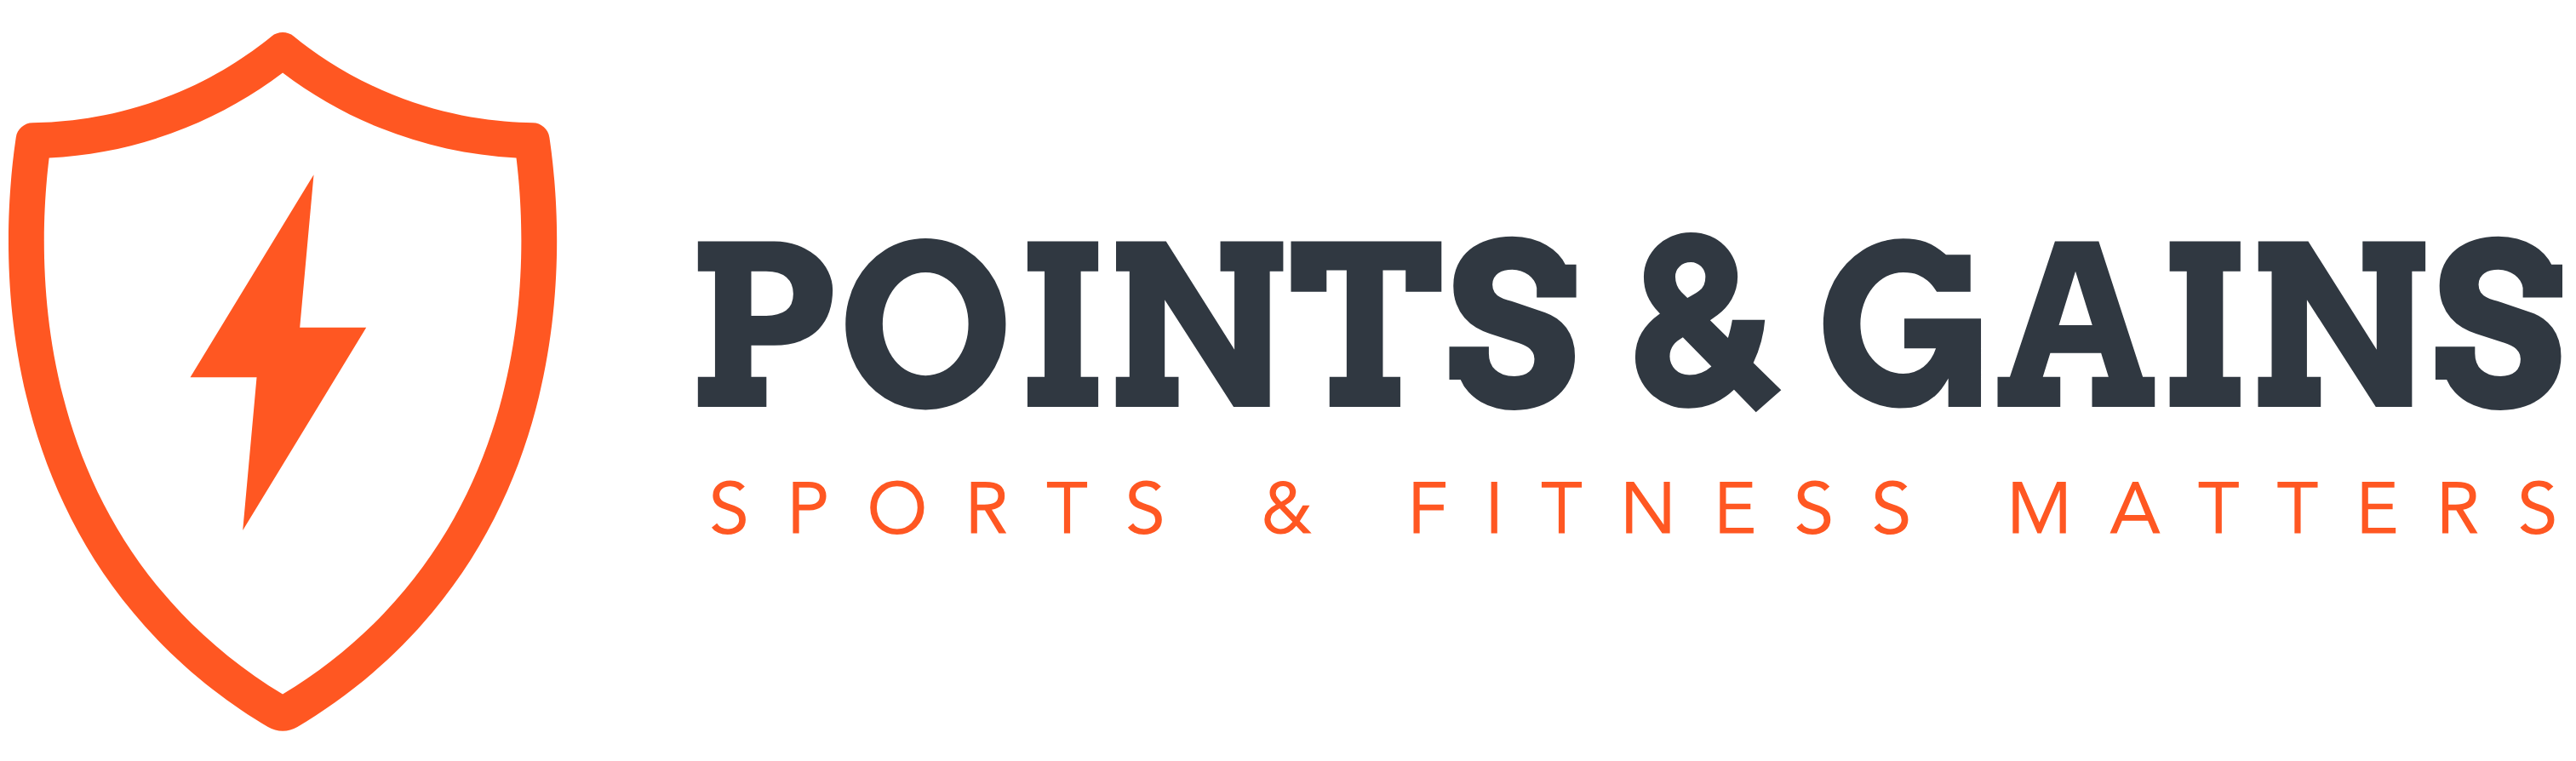 Points & Gains: Sports + Fitness Matters